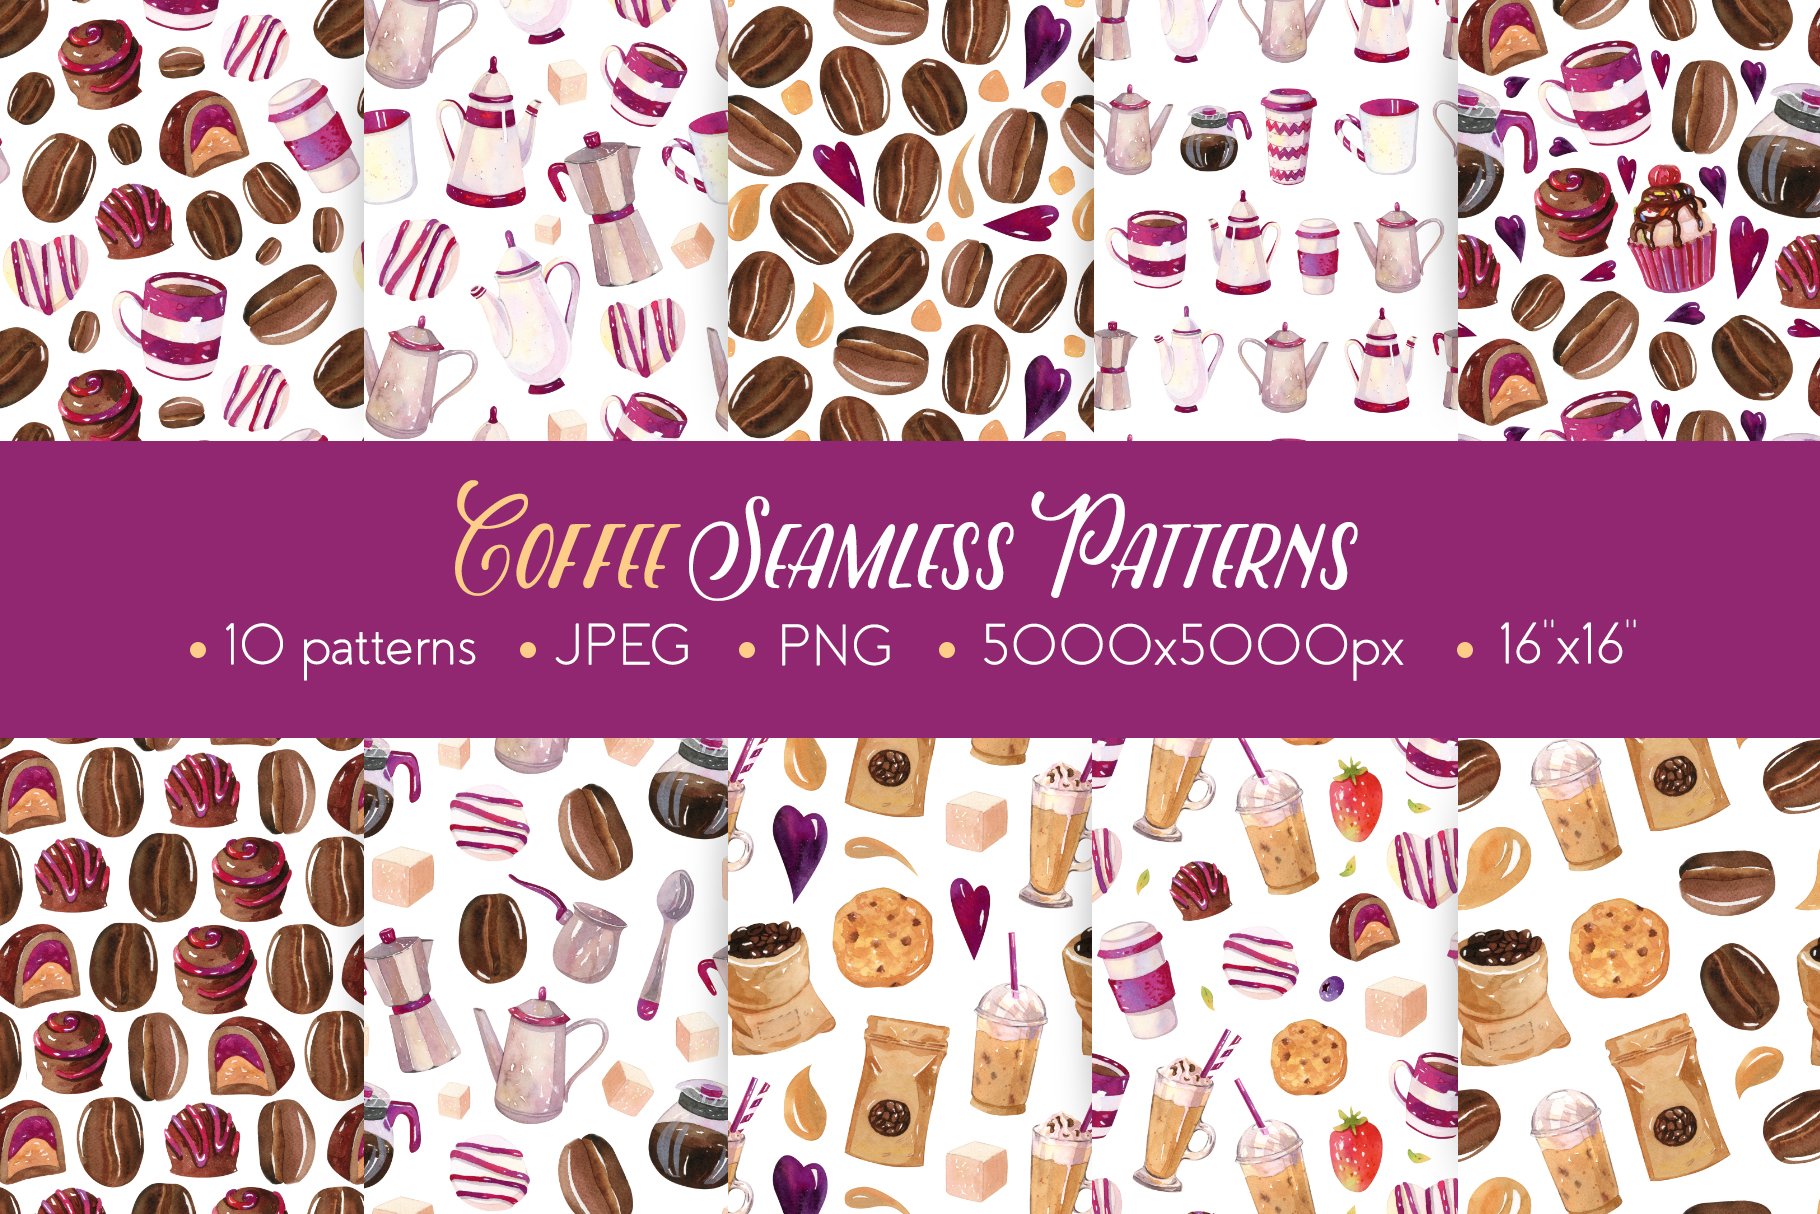 Coffee Watercolor Seamless Patterns cover image.